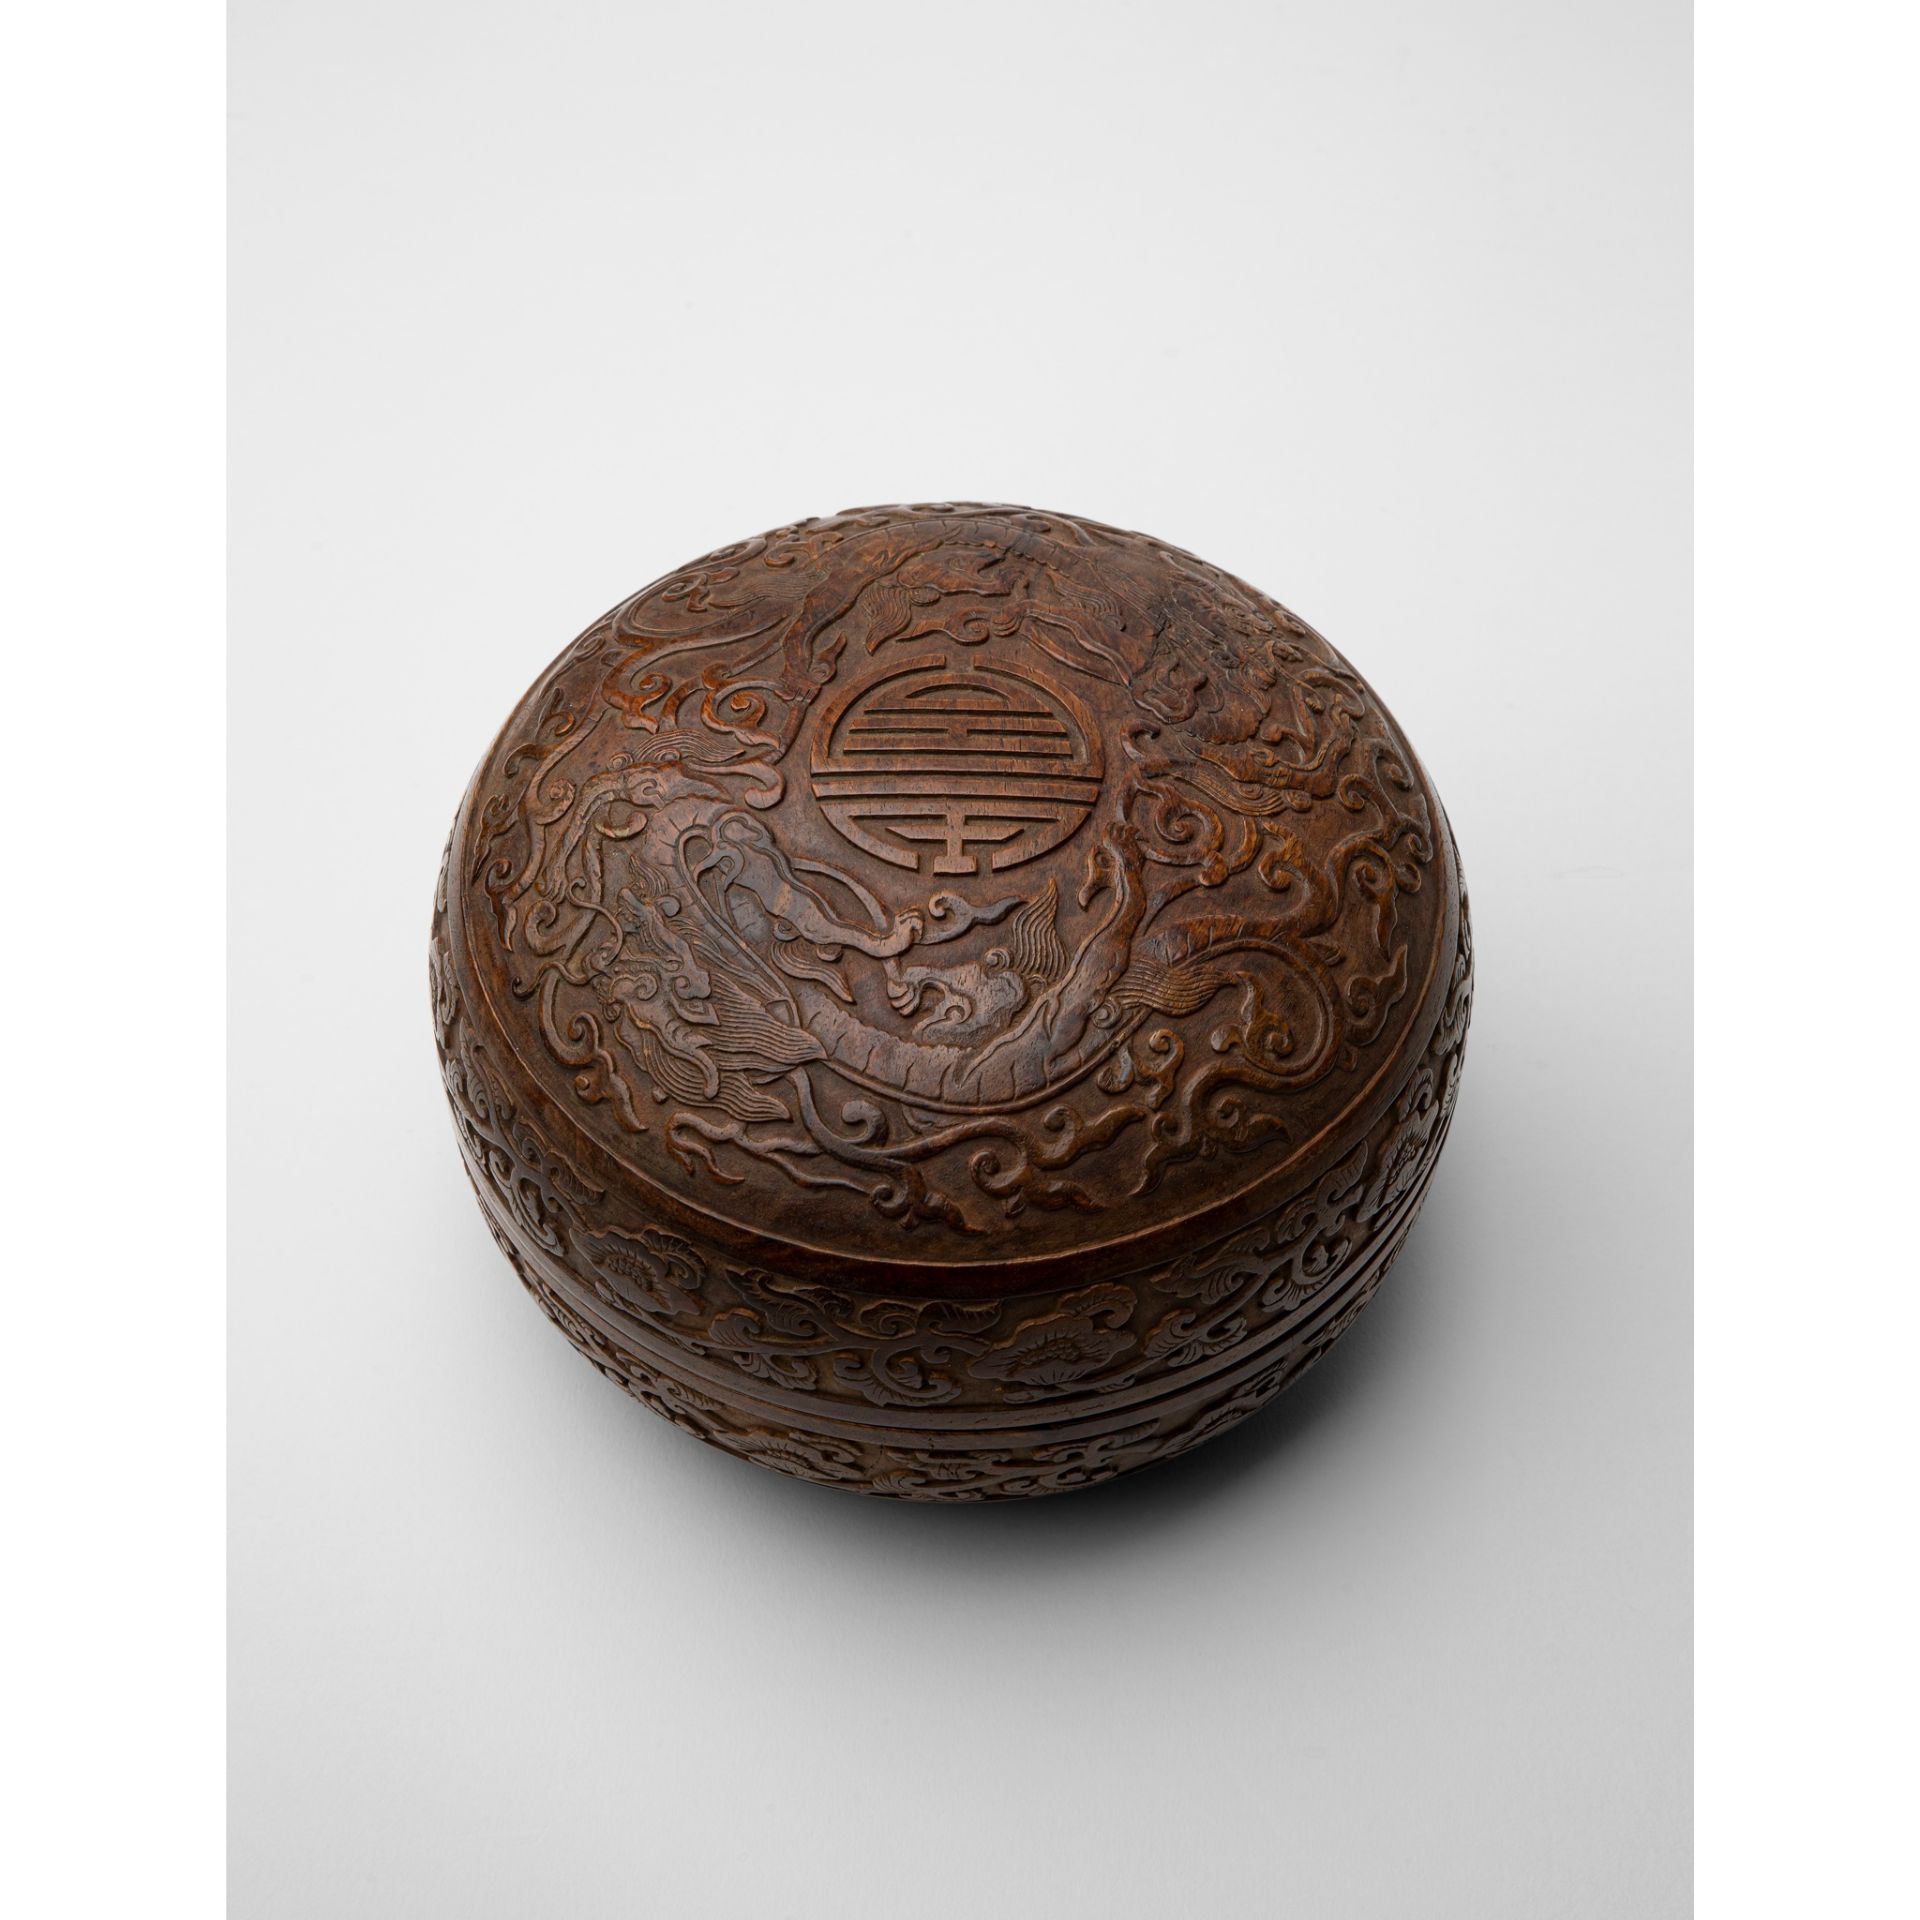 HUANGHUALI CARVED 'DRAGON' CIRCULAR BOX AND COVER QING DYNASTY, 18TH CENTURY